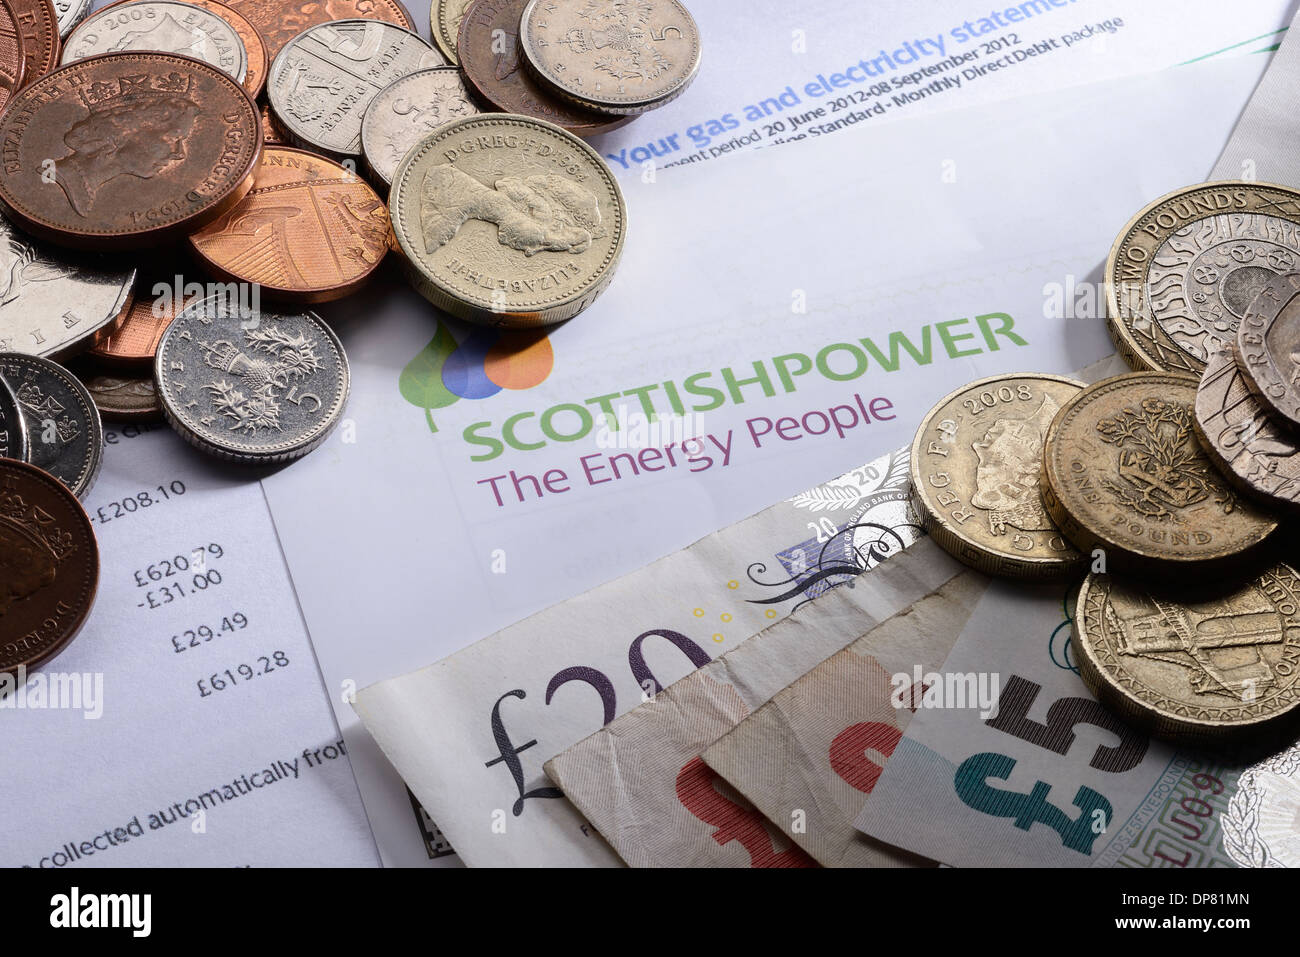 Scottish Power energy bill with coins and money Stock Photo